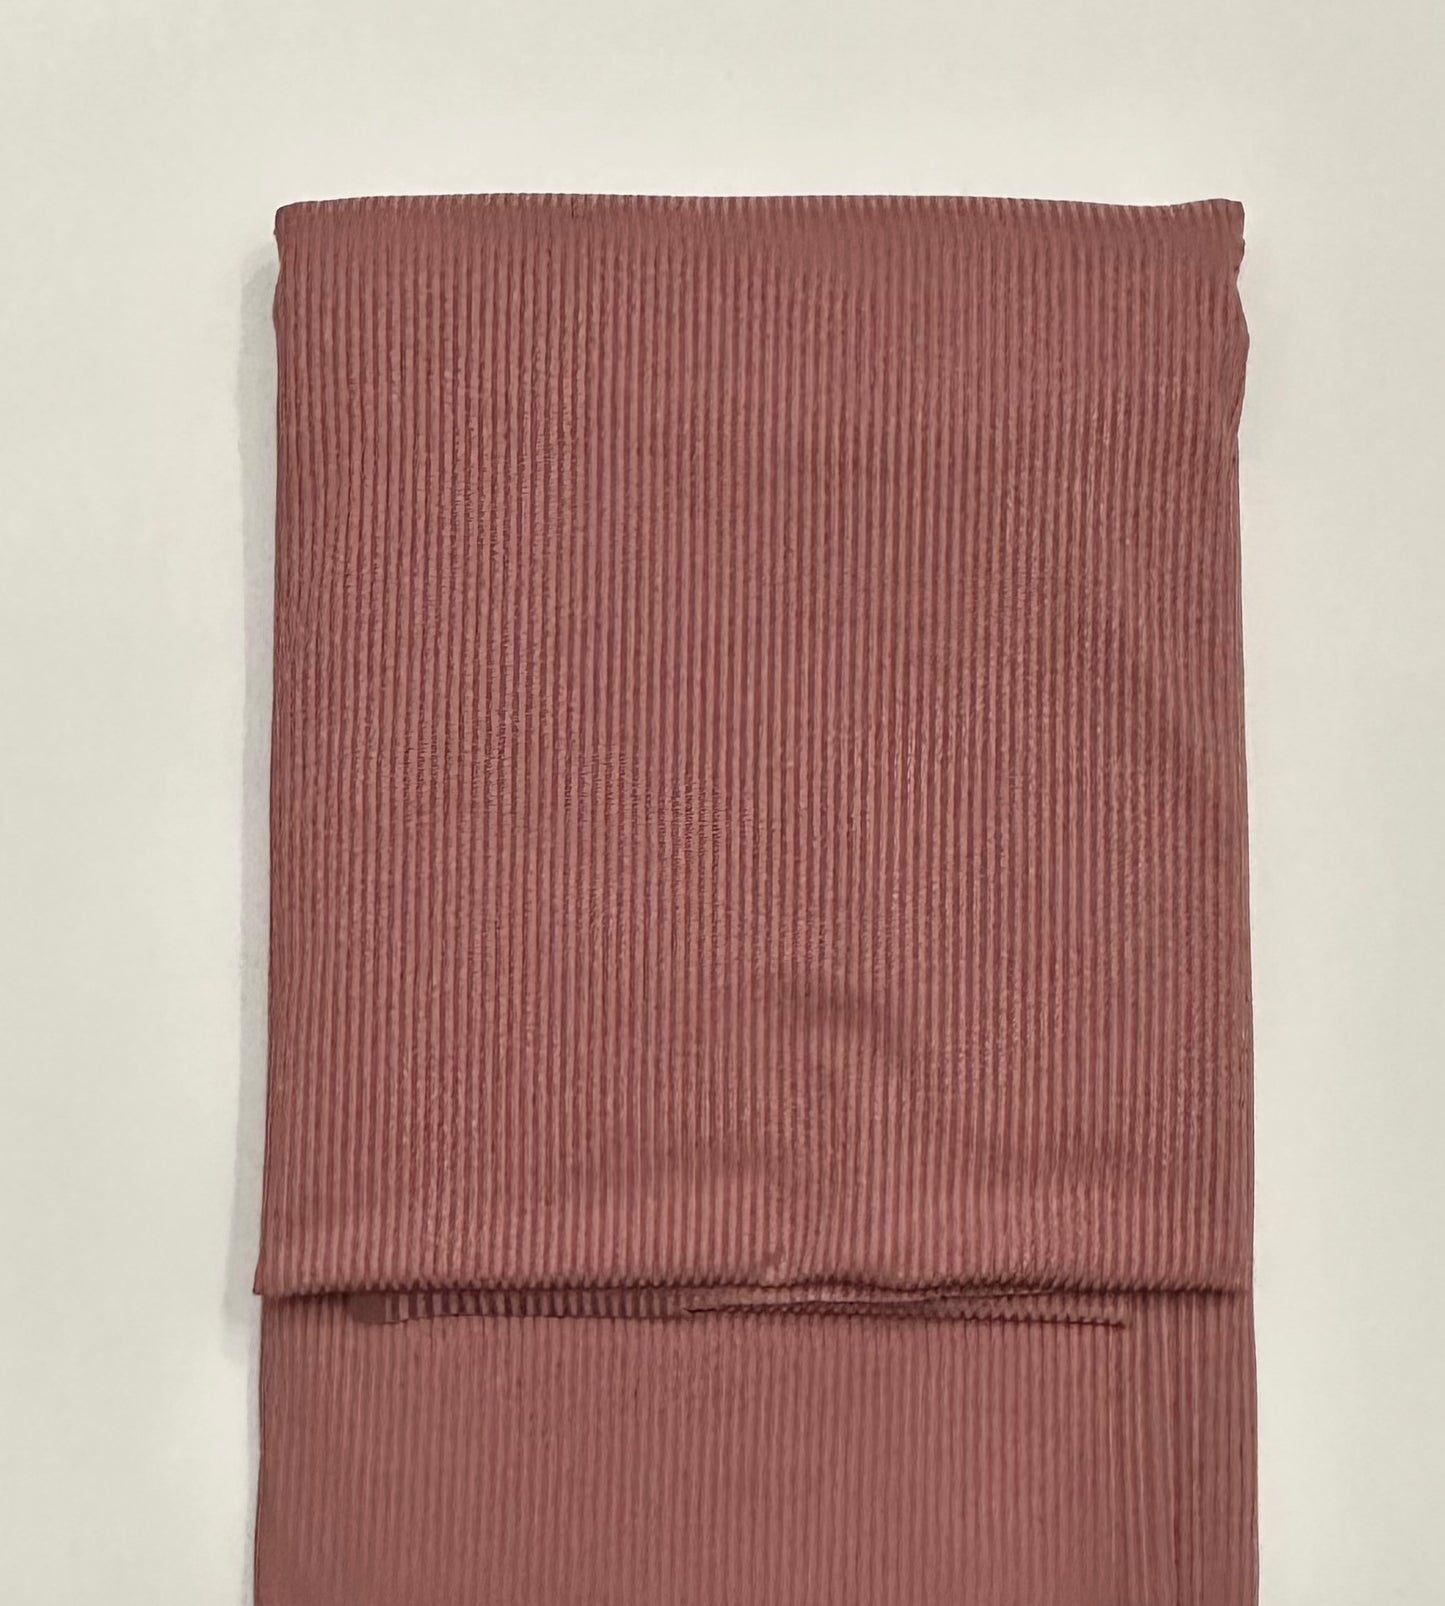 Solid in Rose (new) on Unbrushed Rib Knit Fabric Sold by the 1/4 yard